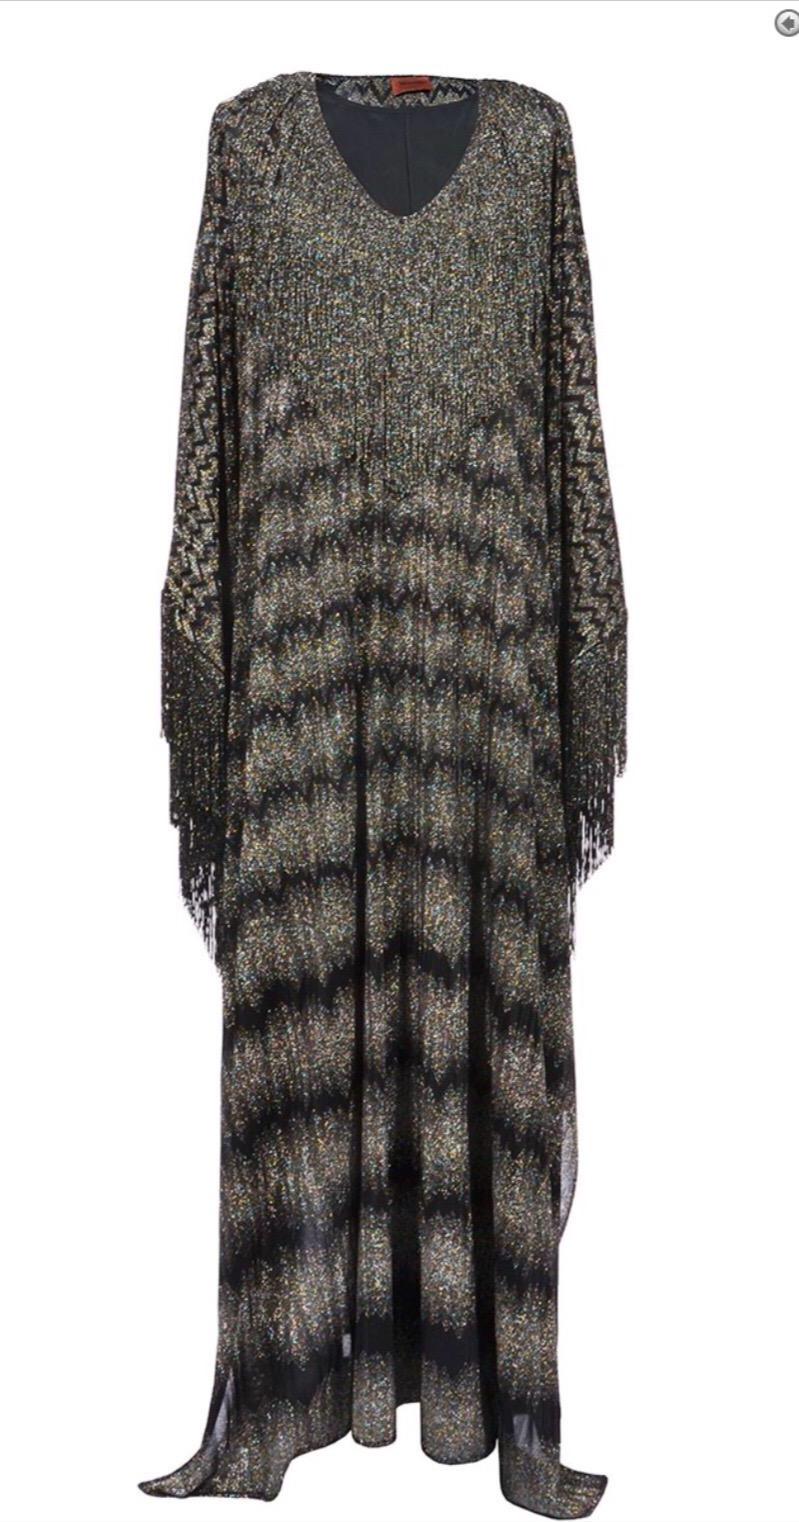 
Missoni's maxi dress is cut in a bohemian-inspired kaftan silhouette enhanced by swathes of swishy fringing. It's spun from kaleidoscopic metallic yarns in the label's iconic zigzag crochet-knit. The deep side splits emphasize the relaxed